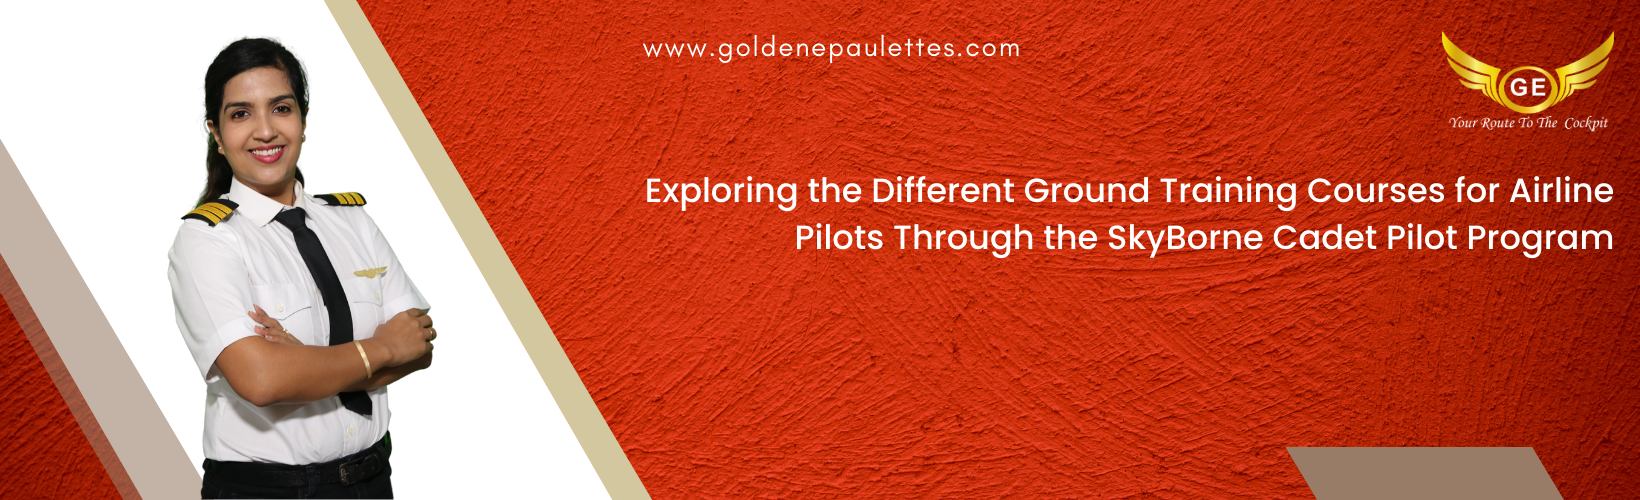 Exploring the Different Ground Training Courses Available Through the SkyBorne Cadet Pilot Program